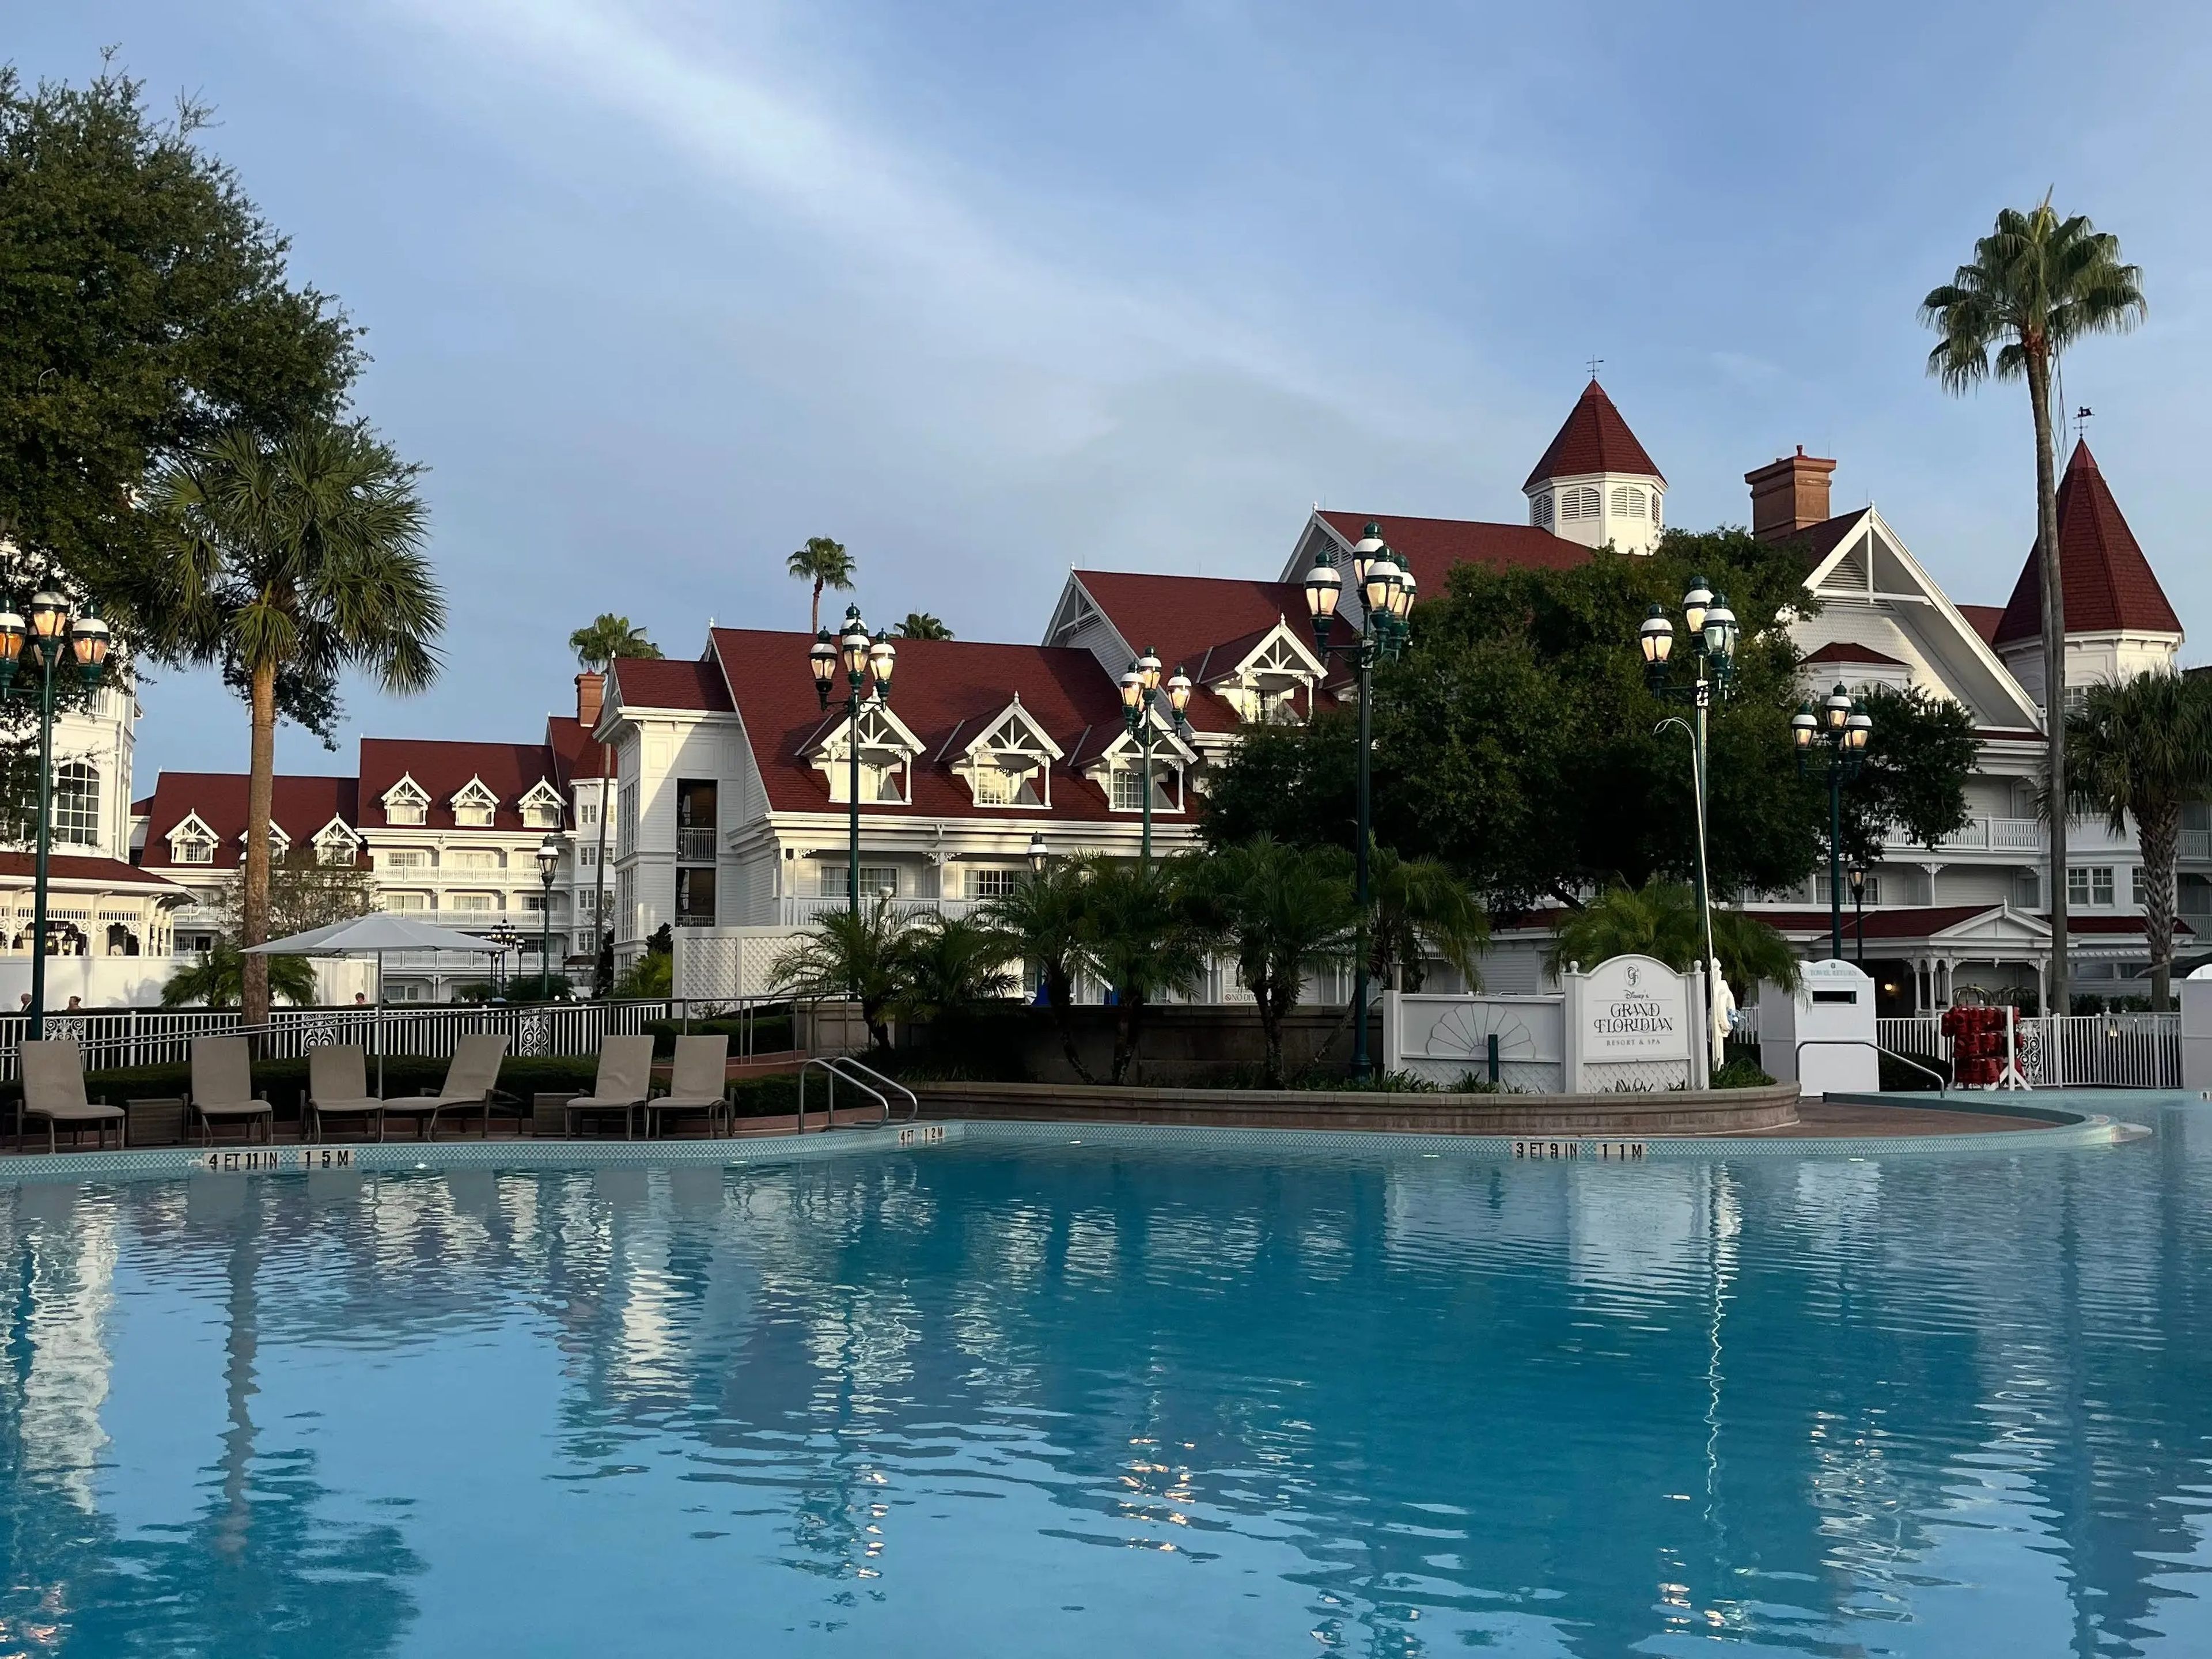 shot of the grand floridian resort from behind the resort's pool